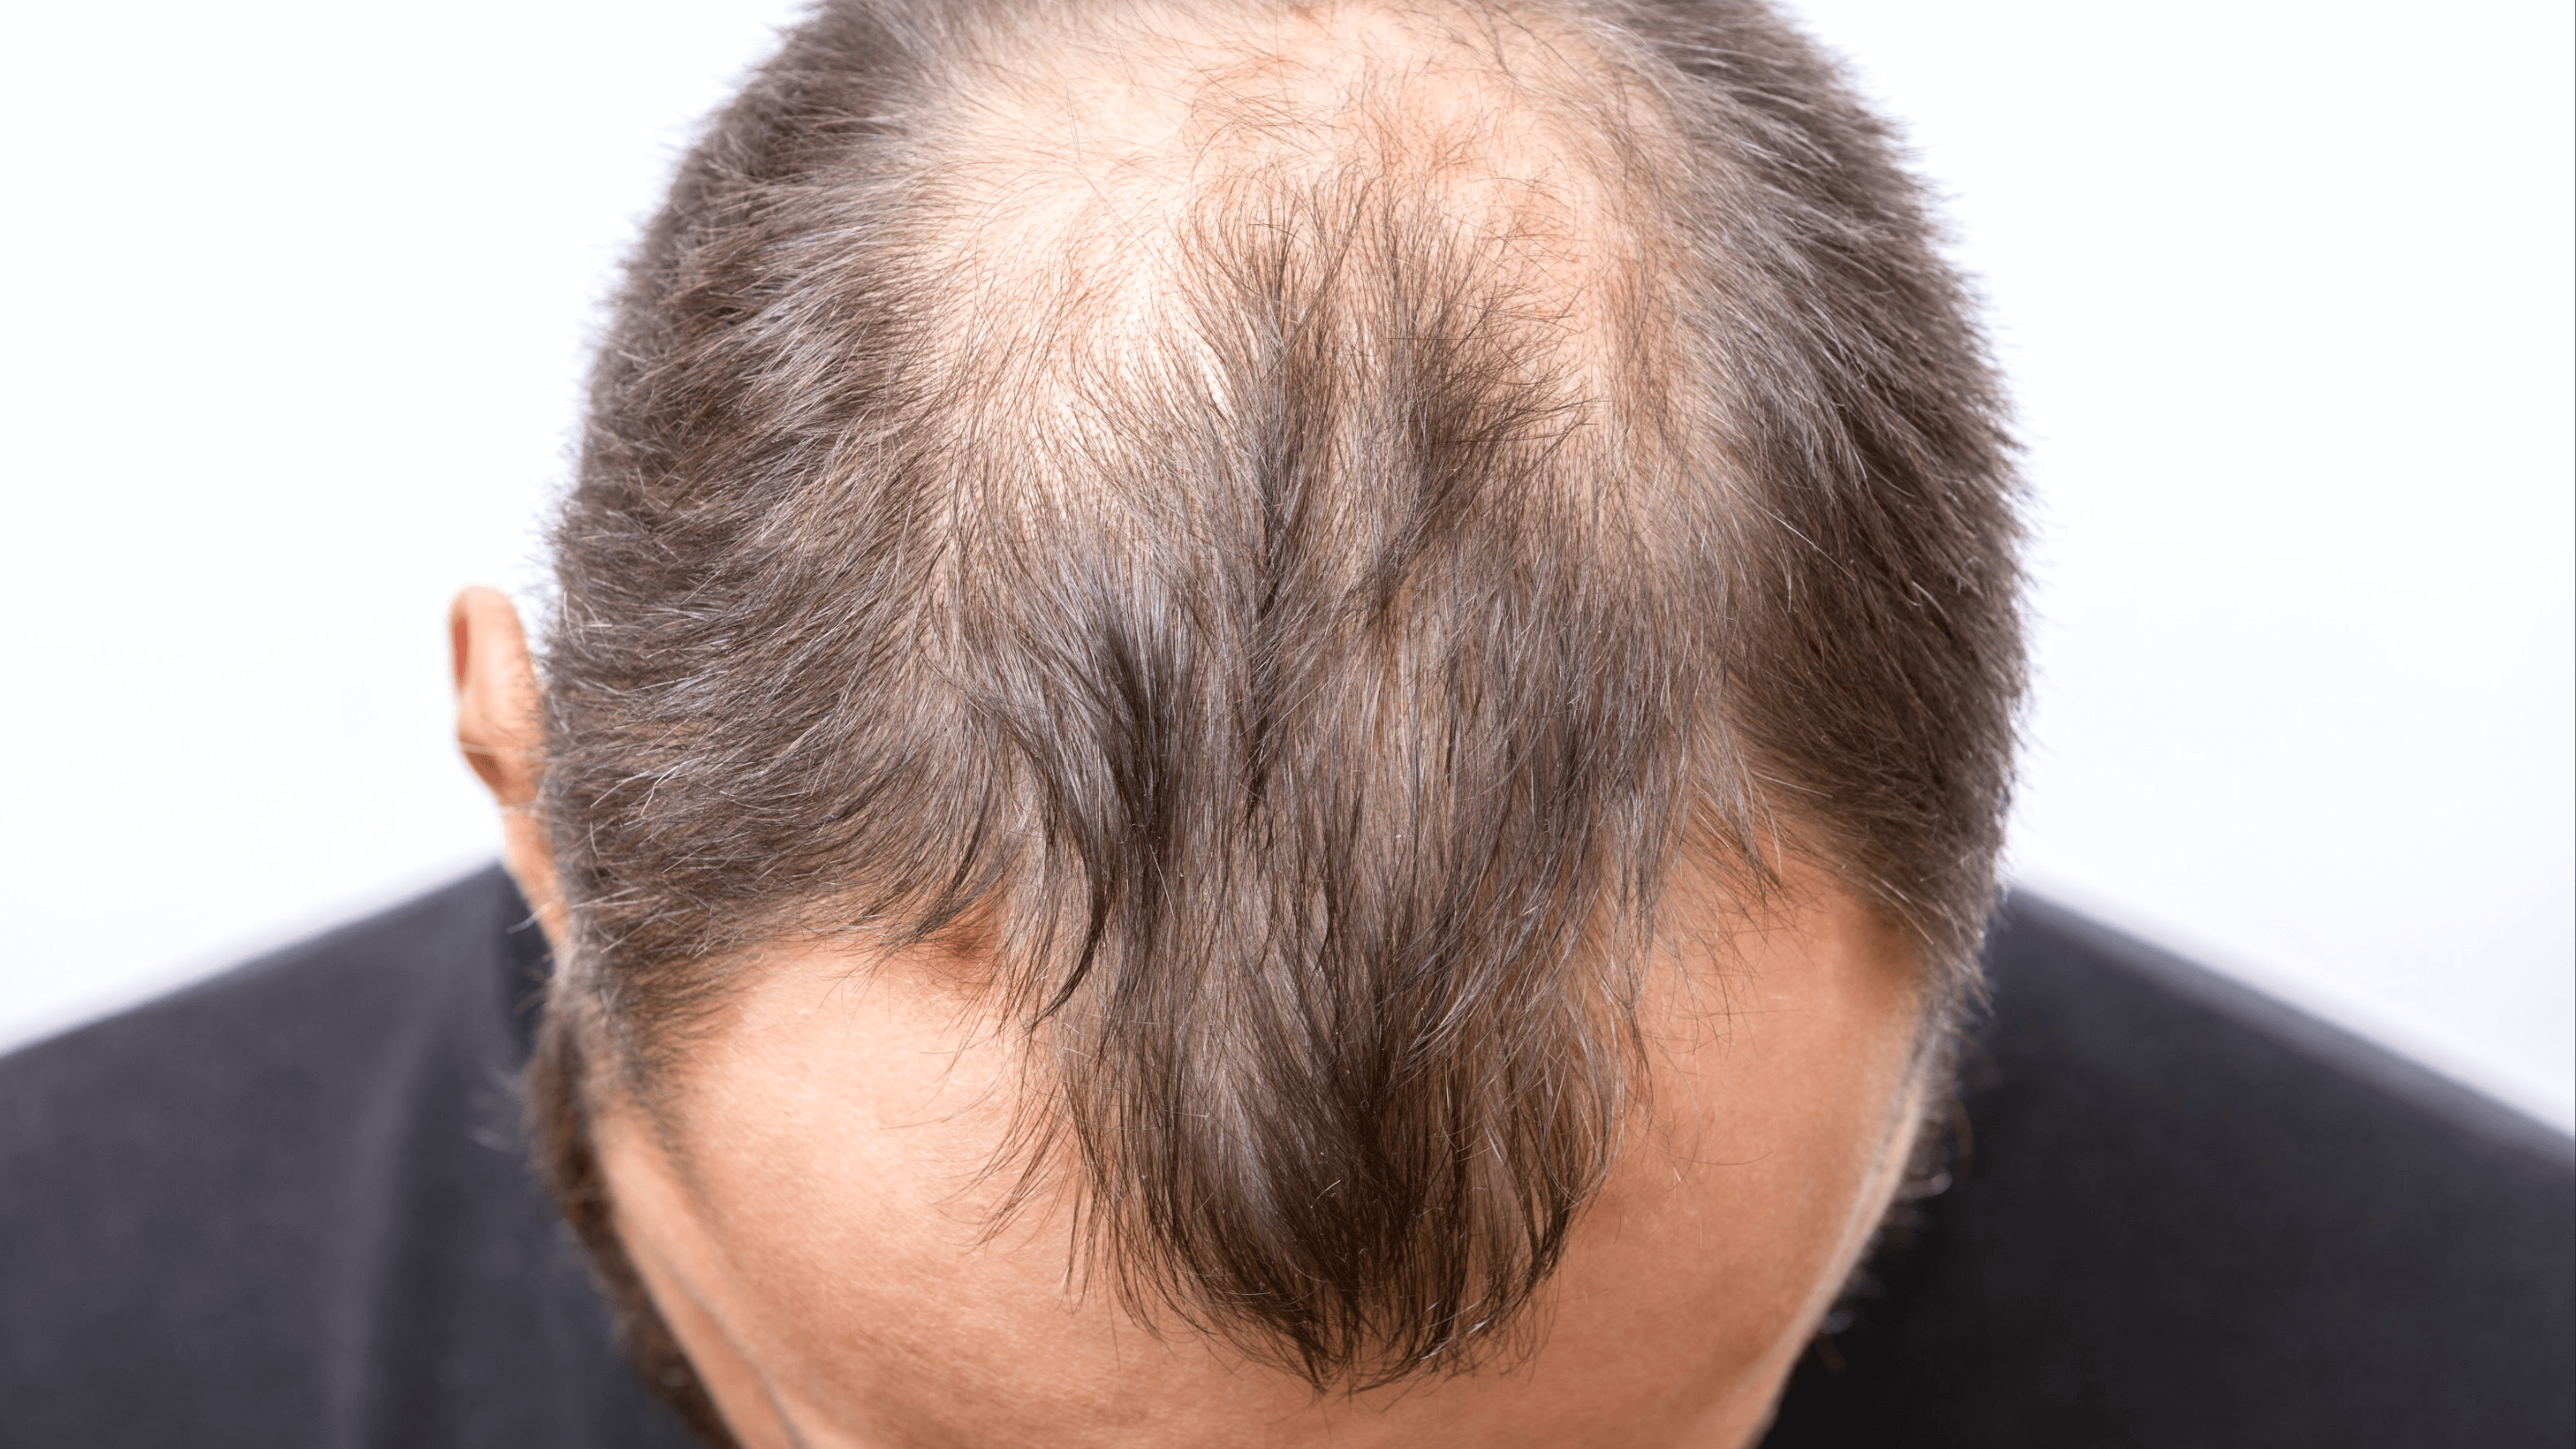 Is It Possible To Regrow Hair On My Bald Spots?